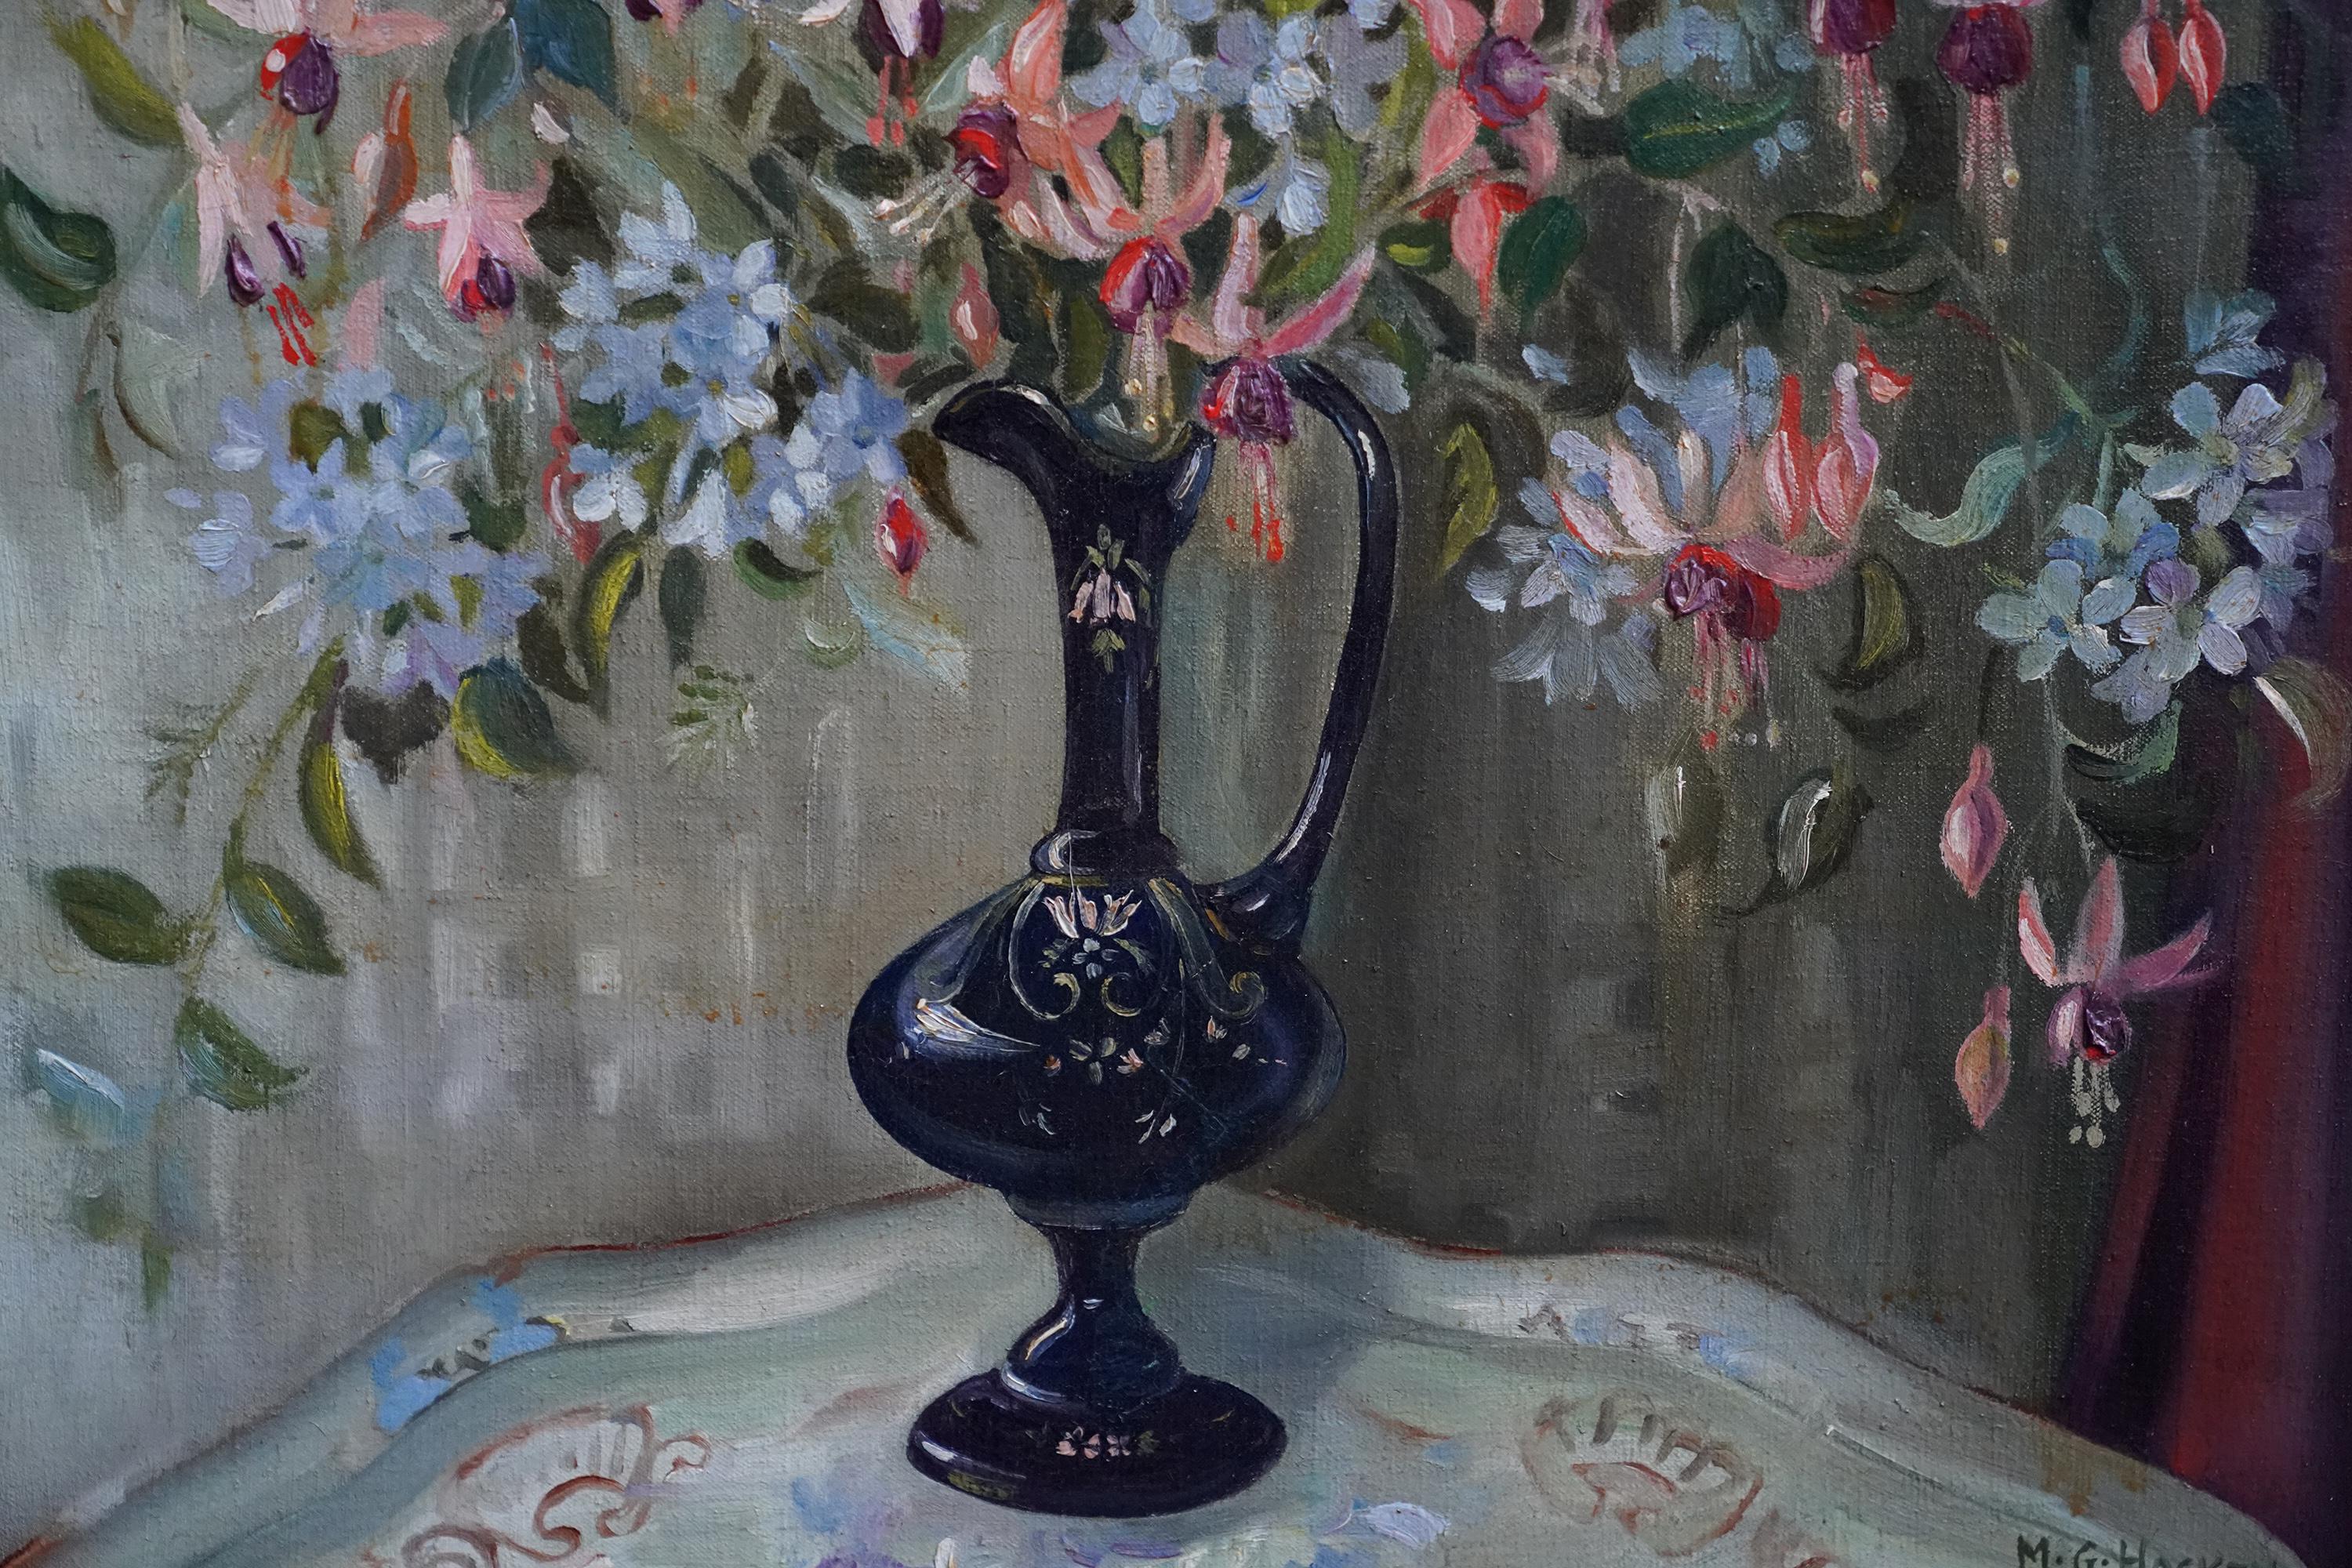 This charming floral oil painting is by Cornish born artist Marion Grace Hocken. Painted circa 1950 it is a floral arrangement of pink and purple fuchsia with sprays of blue flowers in a blue glass vase on a table. A keen botanist, Hocken has